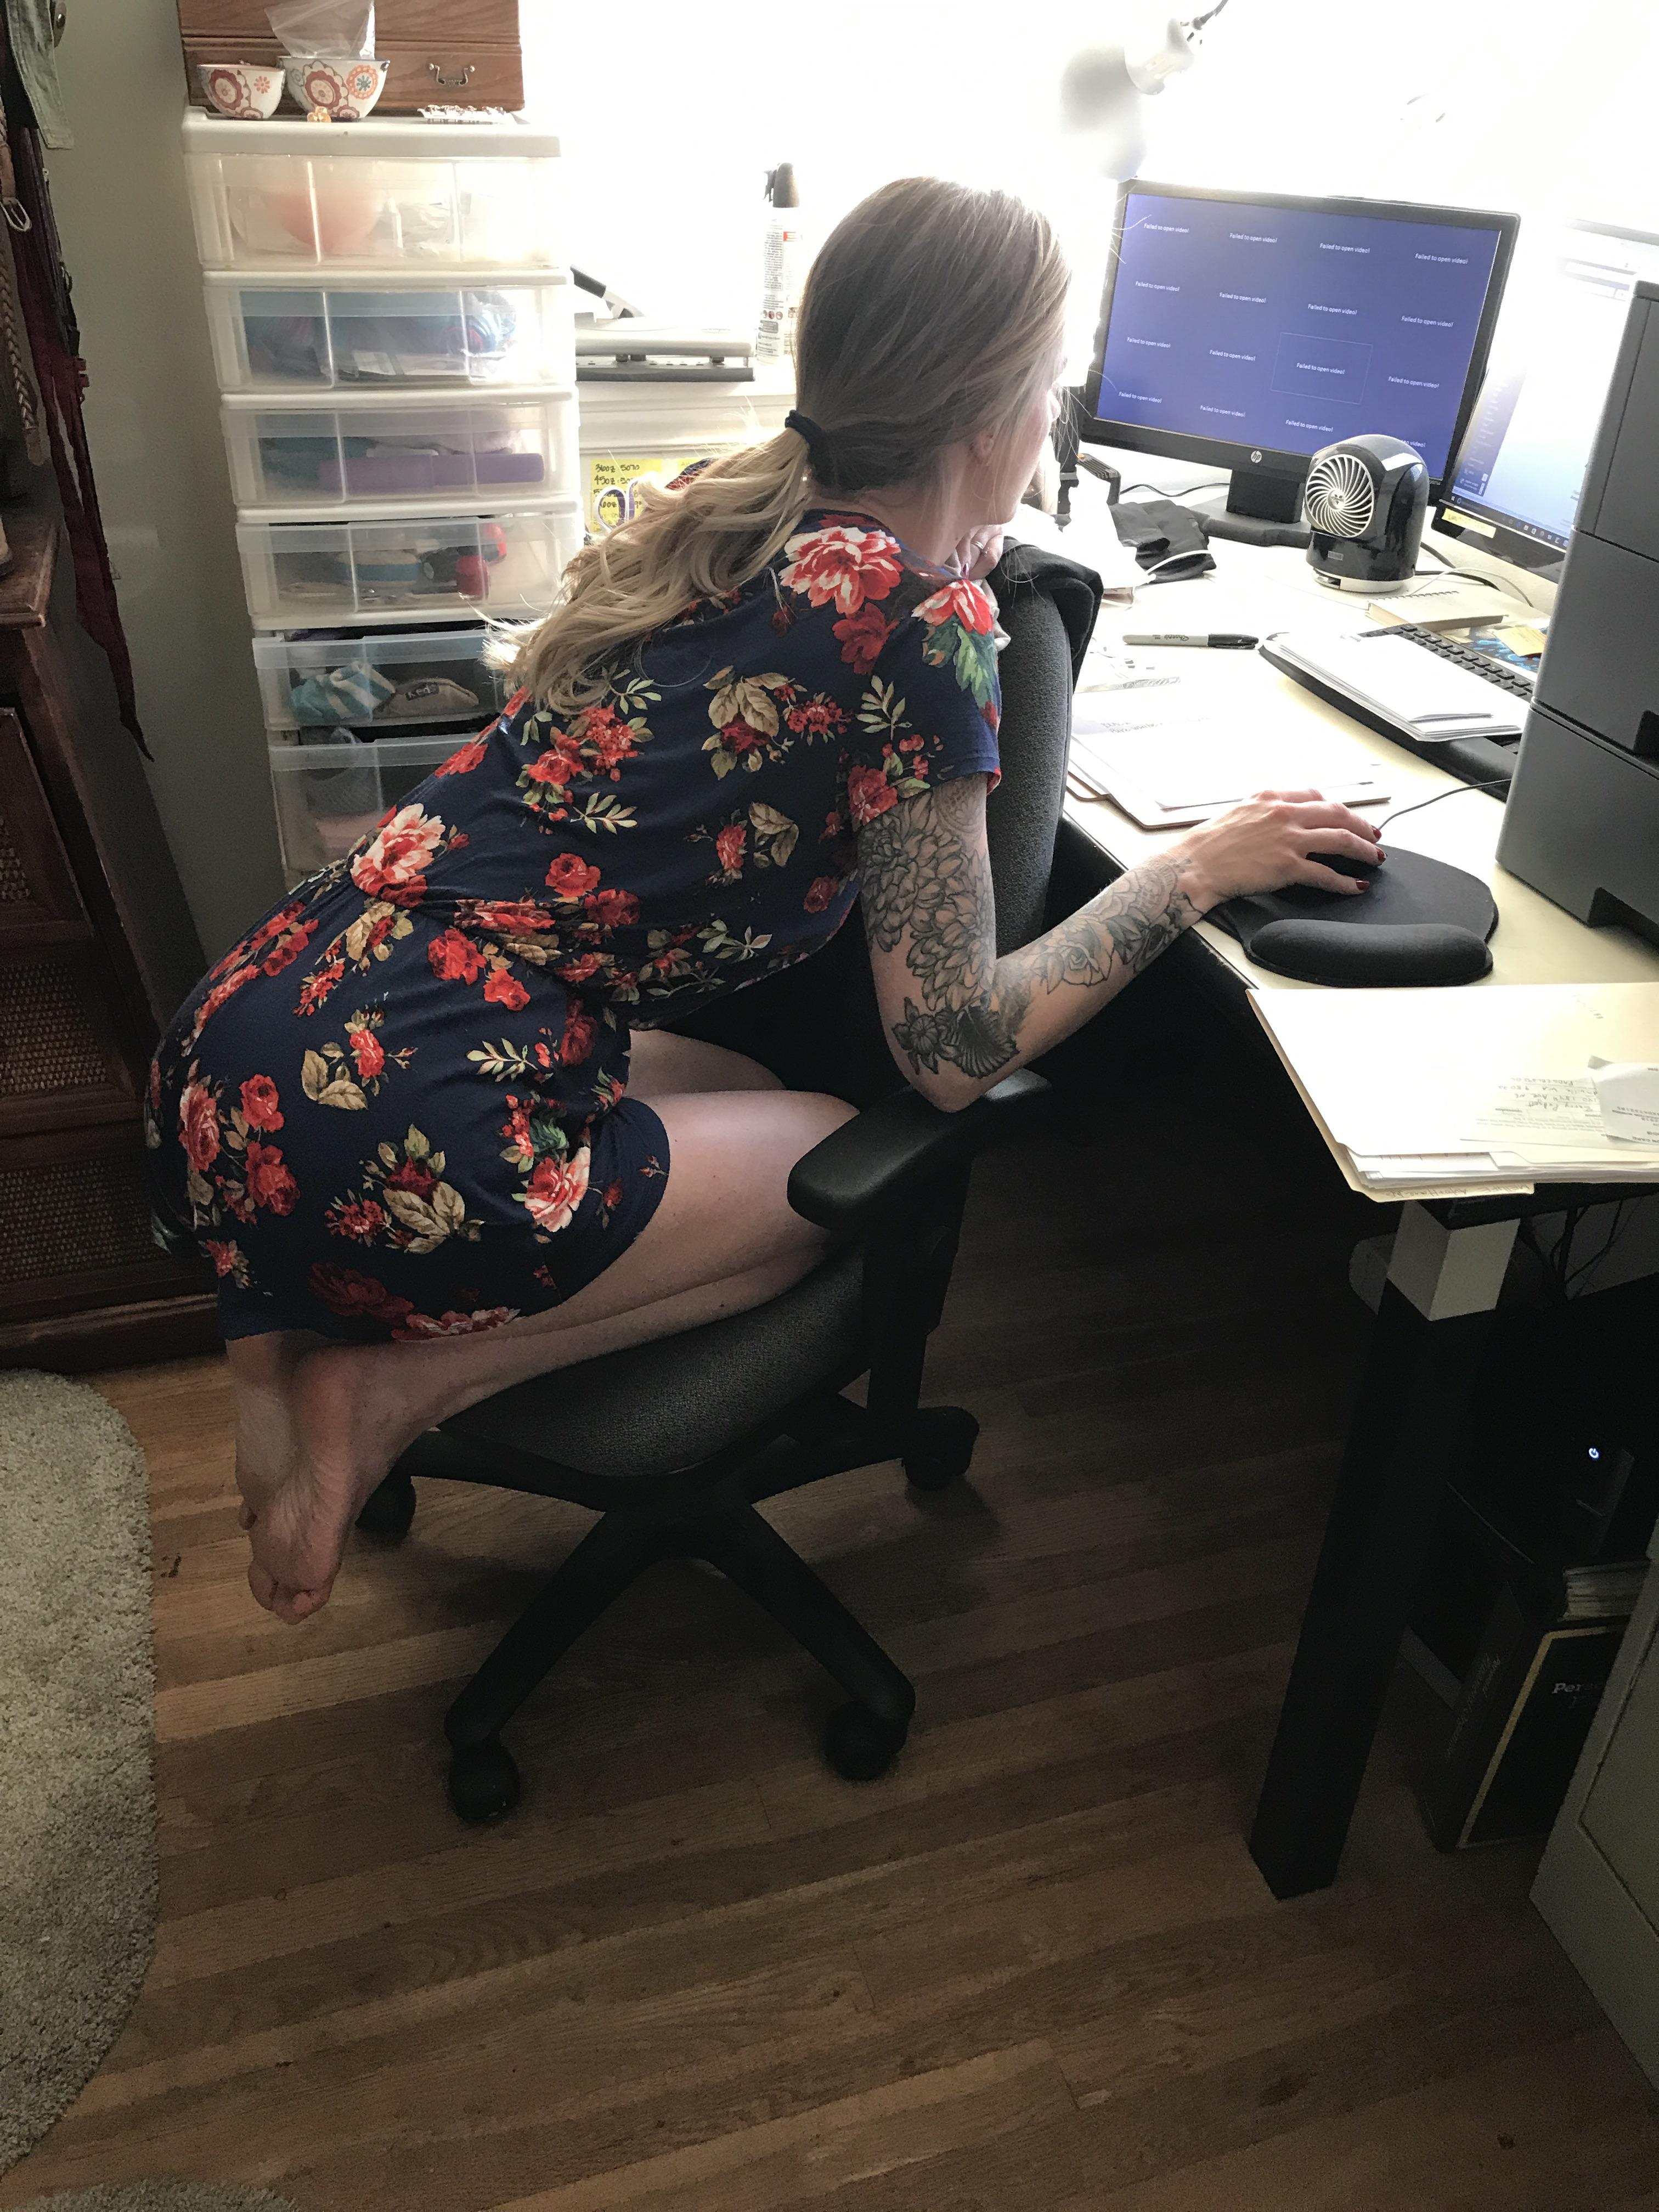 My hot little wife working hard in her office